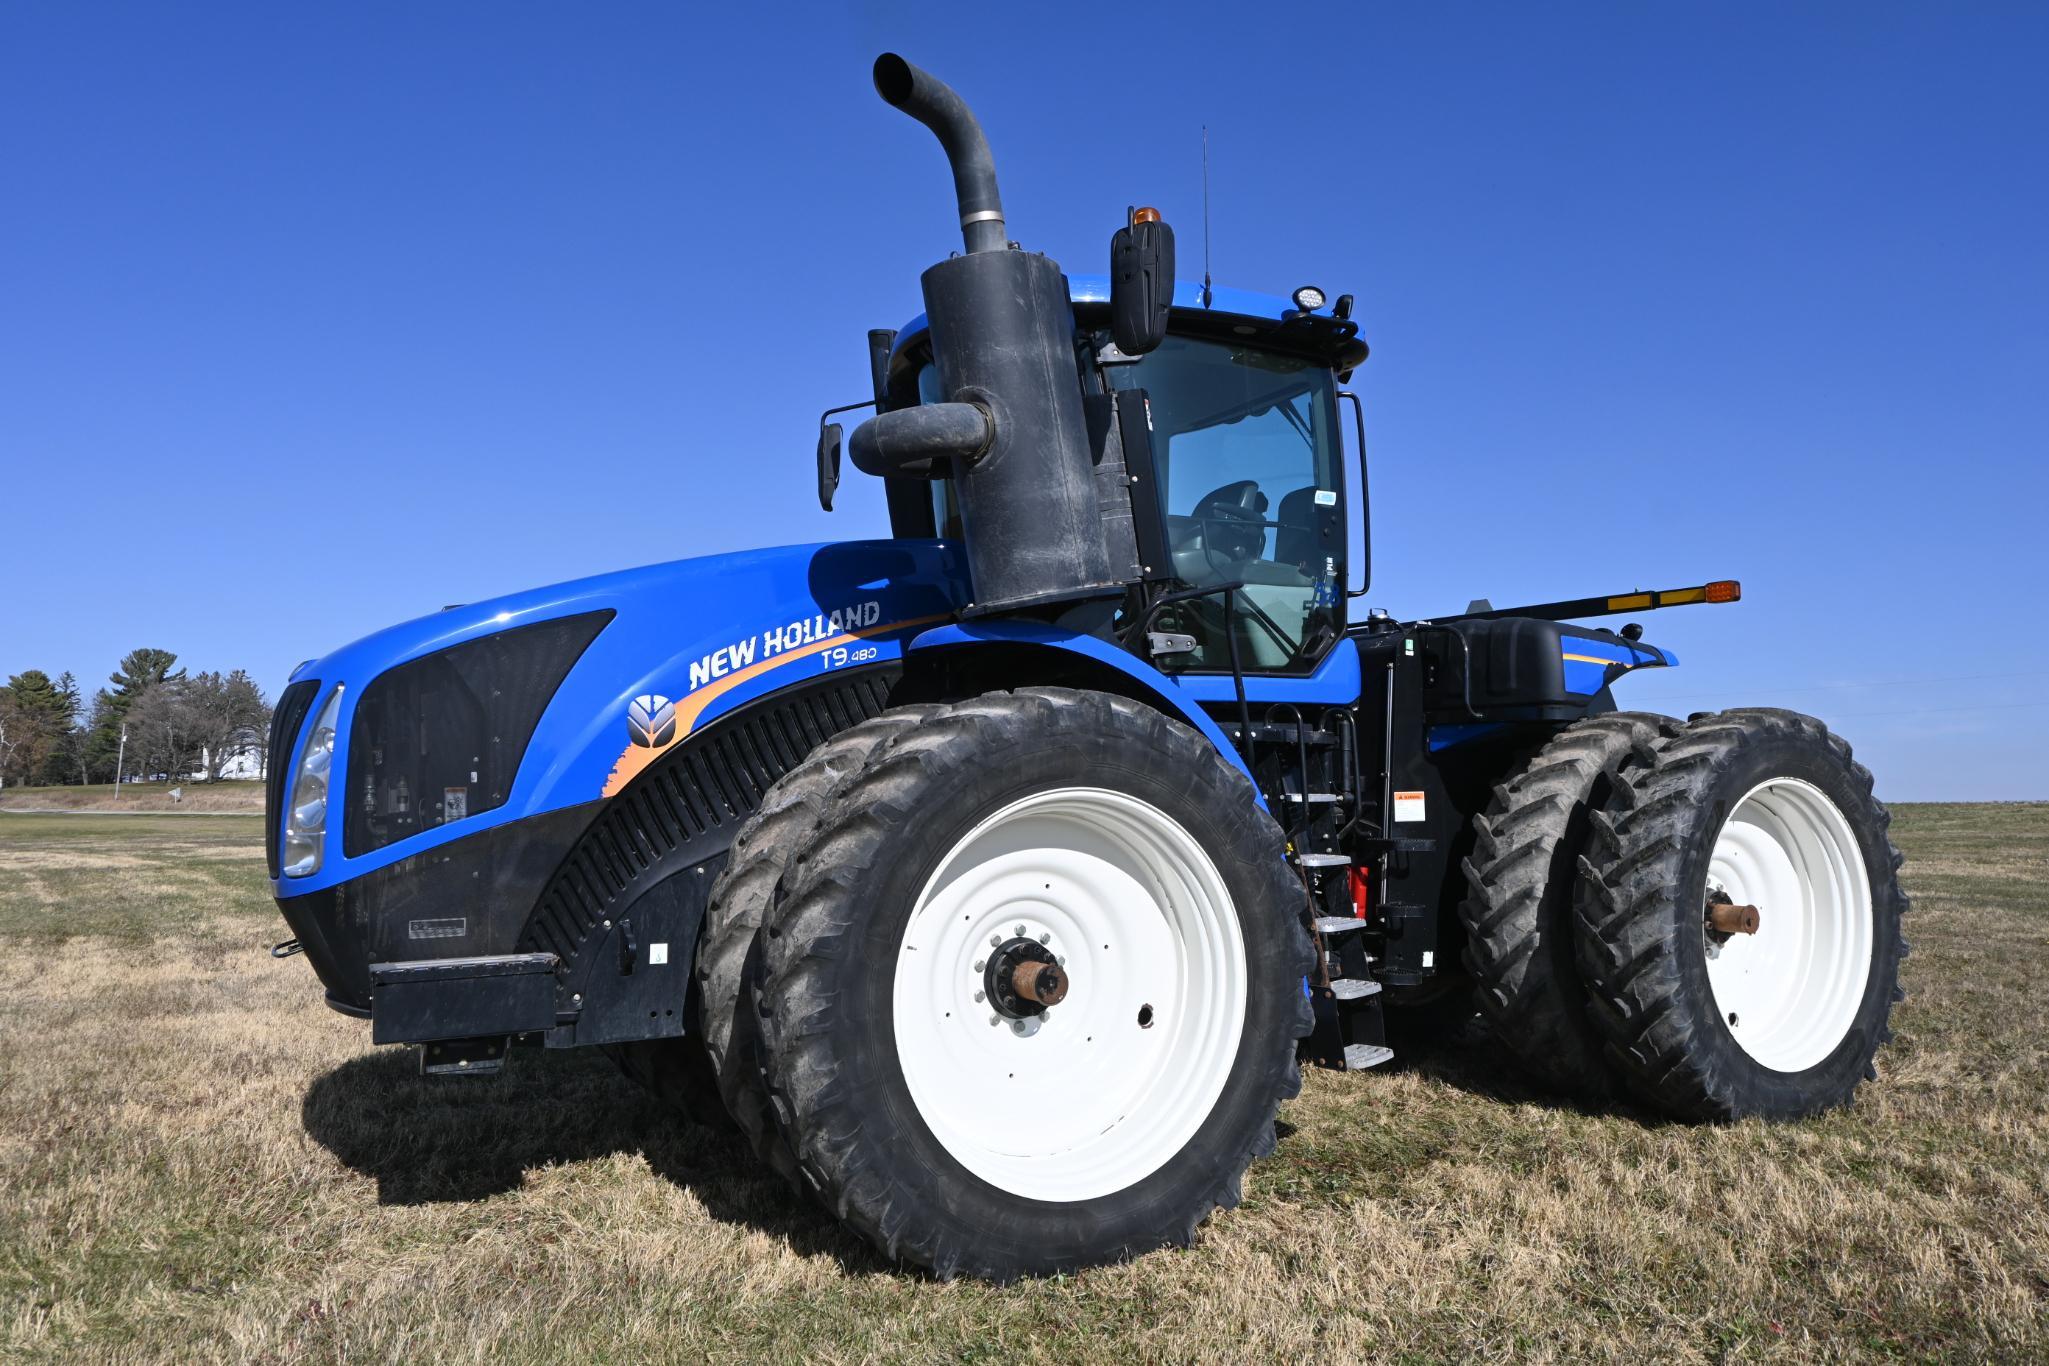 2018 New Holland T9.480 4wd tractor | Proxibid